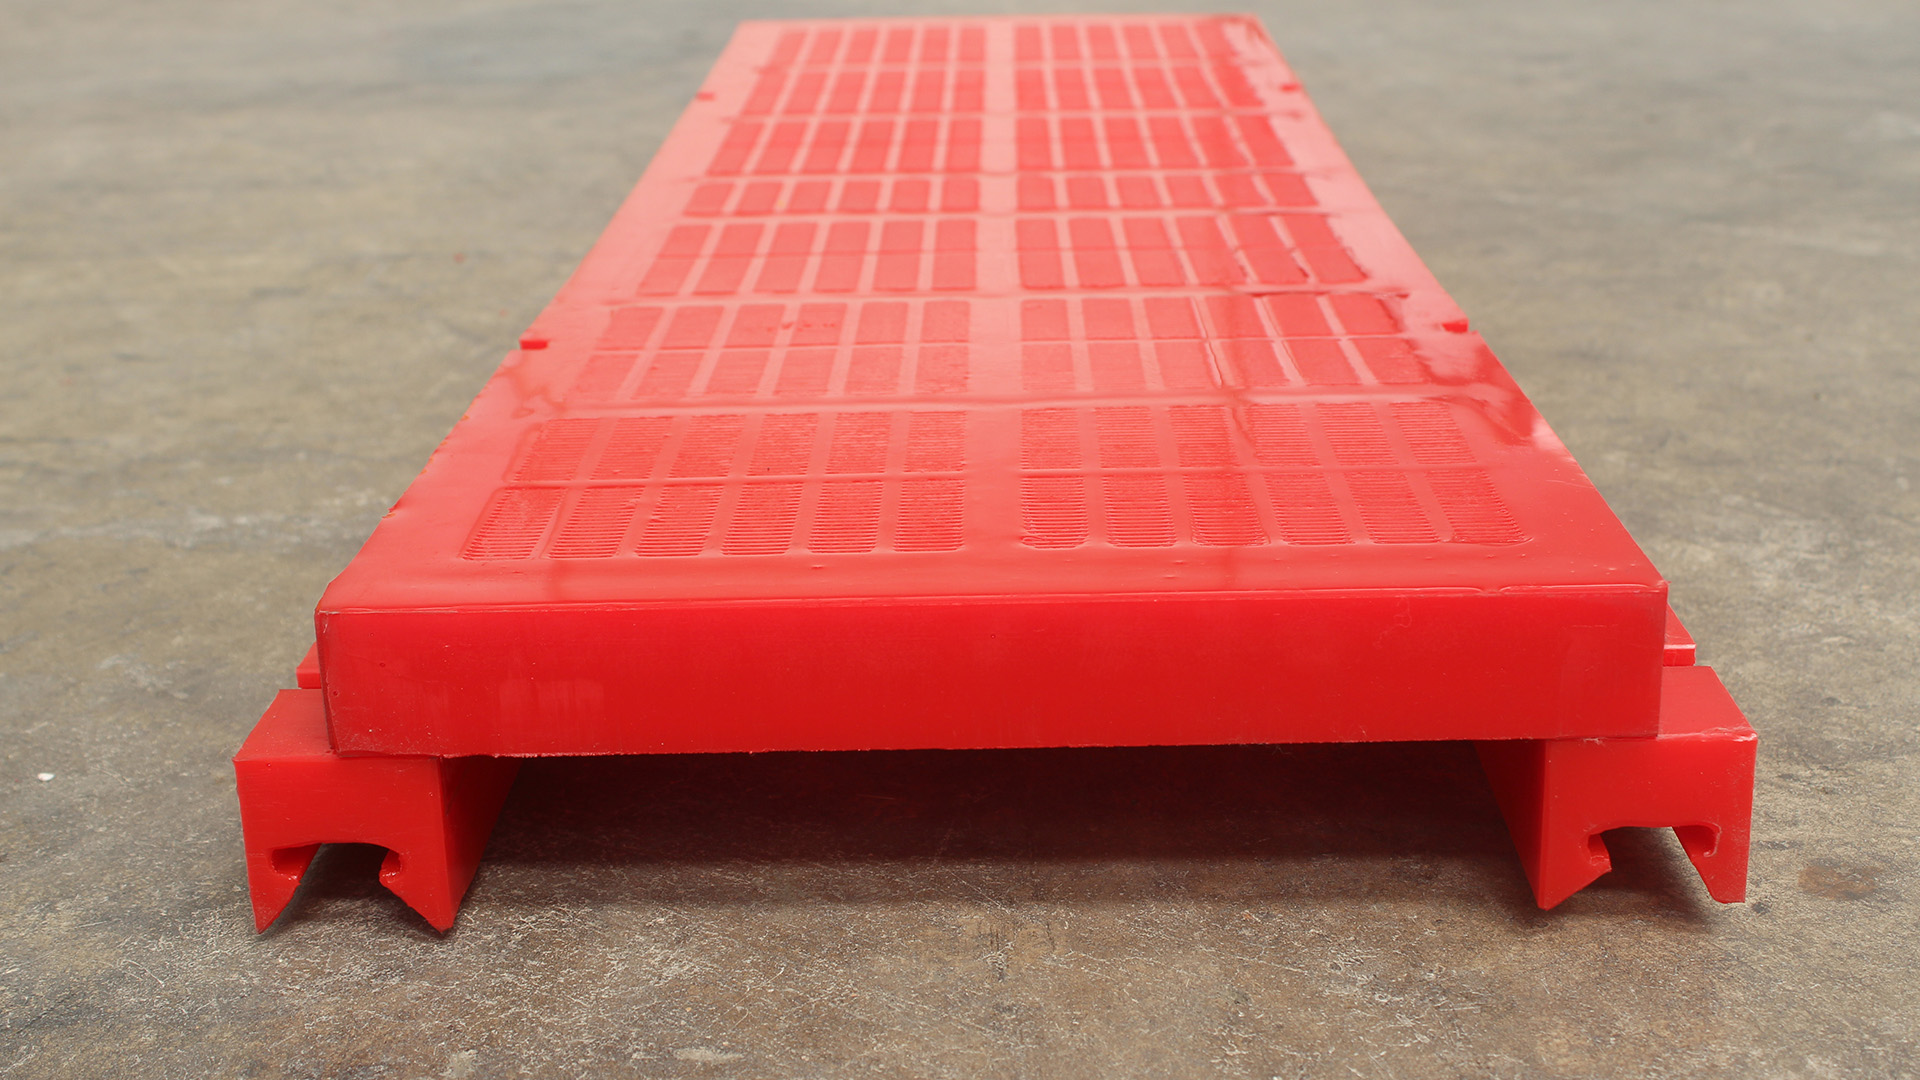 vibrating screen,used vibrating screen for sale,mining dewatering modular sieve-CHAISHANG | Polyurethane Screen,Rubber Screen Panels,Polyweb Screen,Belt Cleaner,Flotion Cell